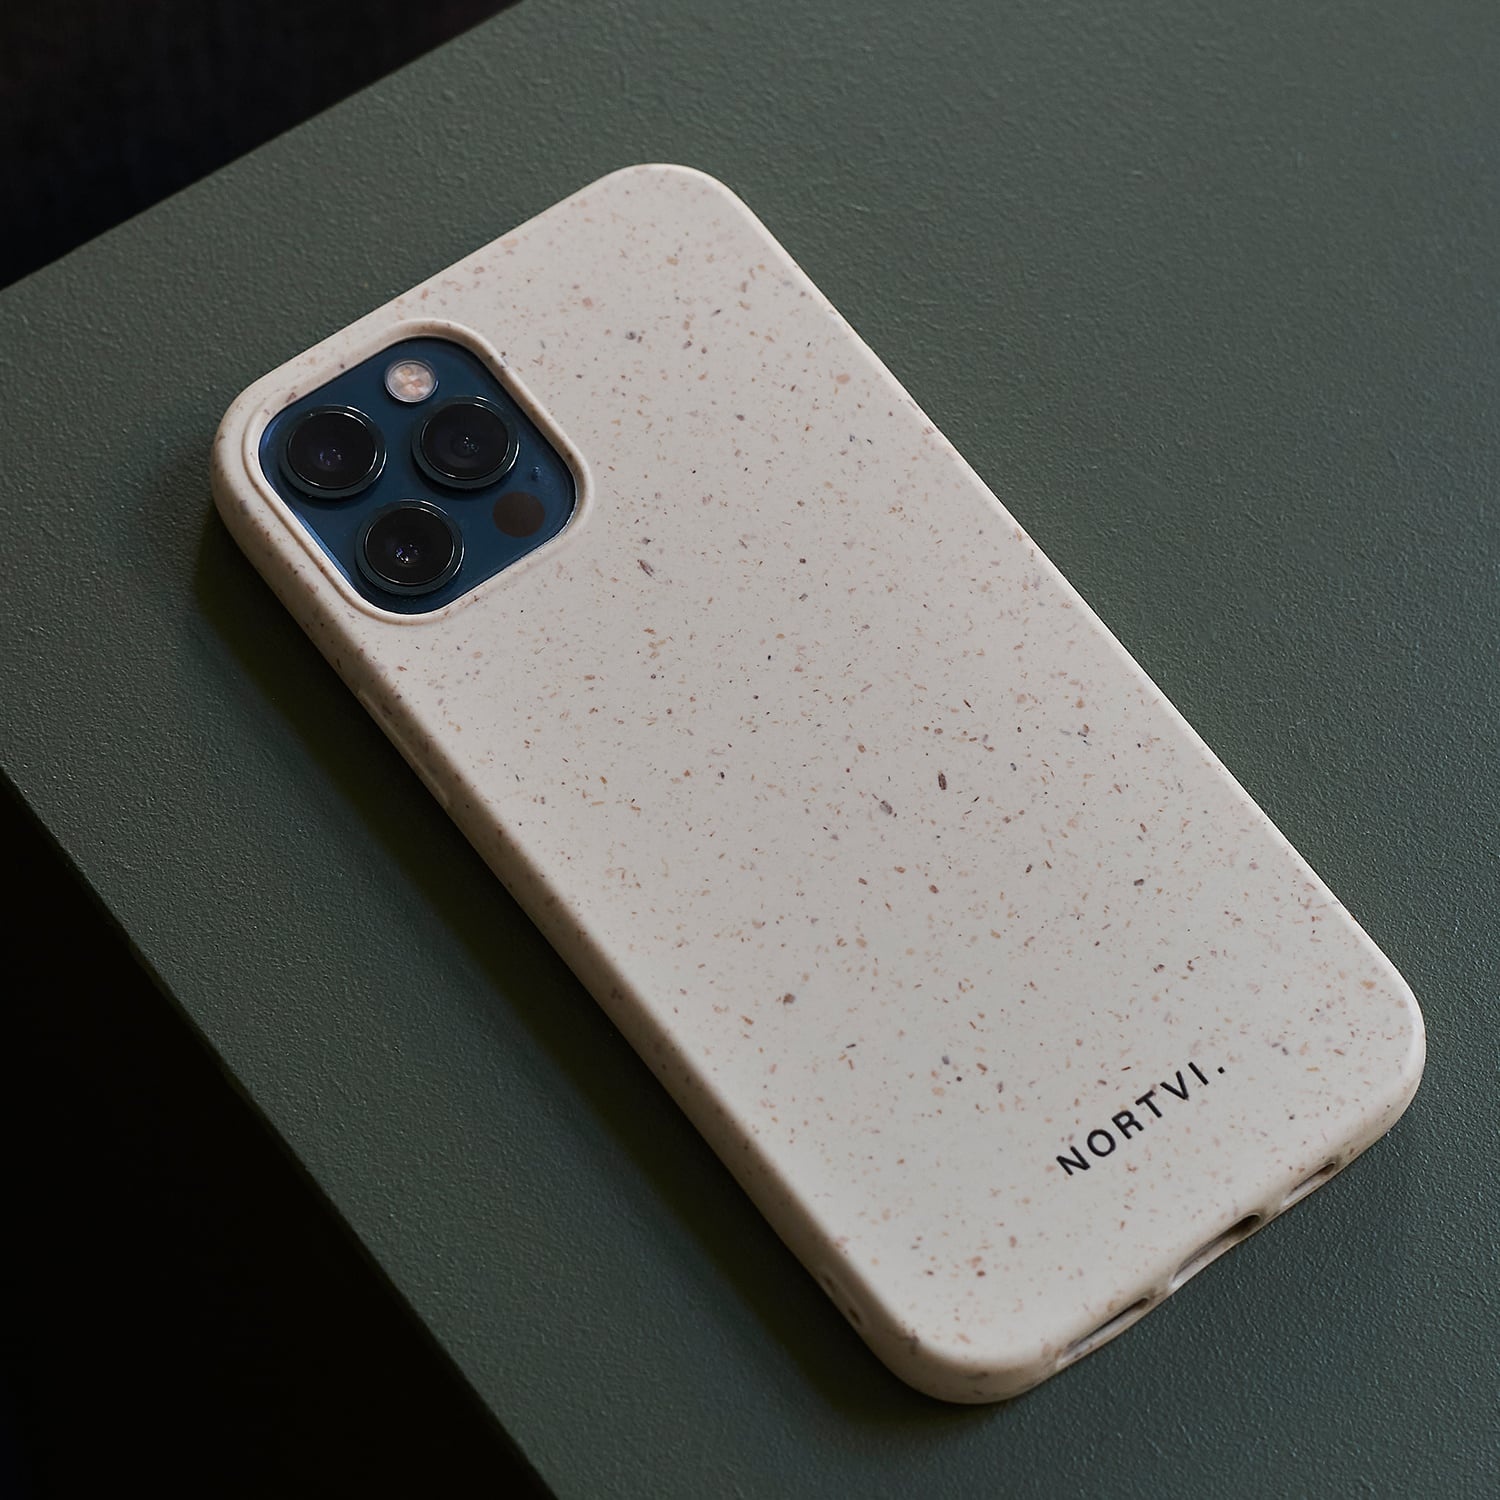 NORTVI white phone case for iPhone 12